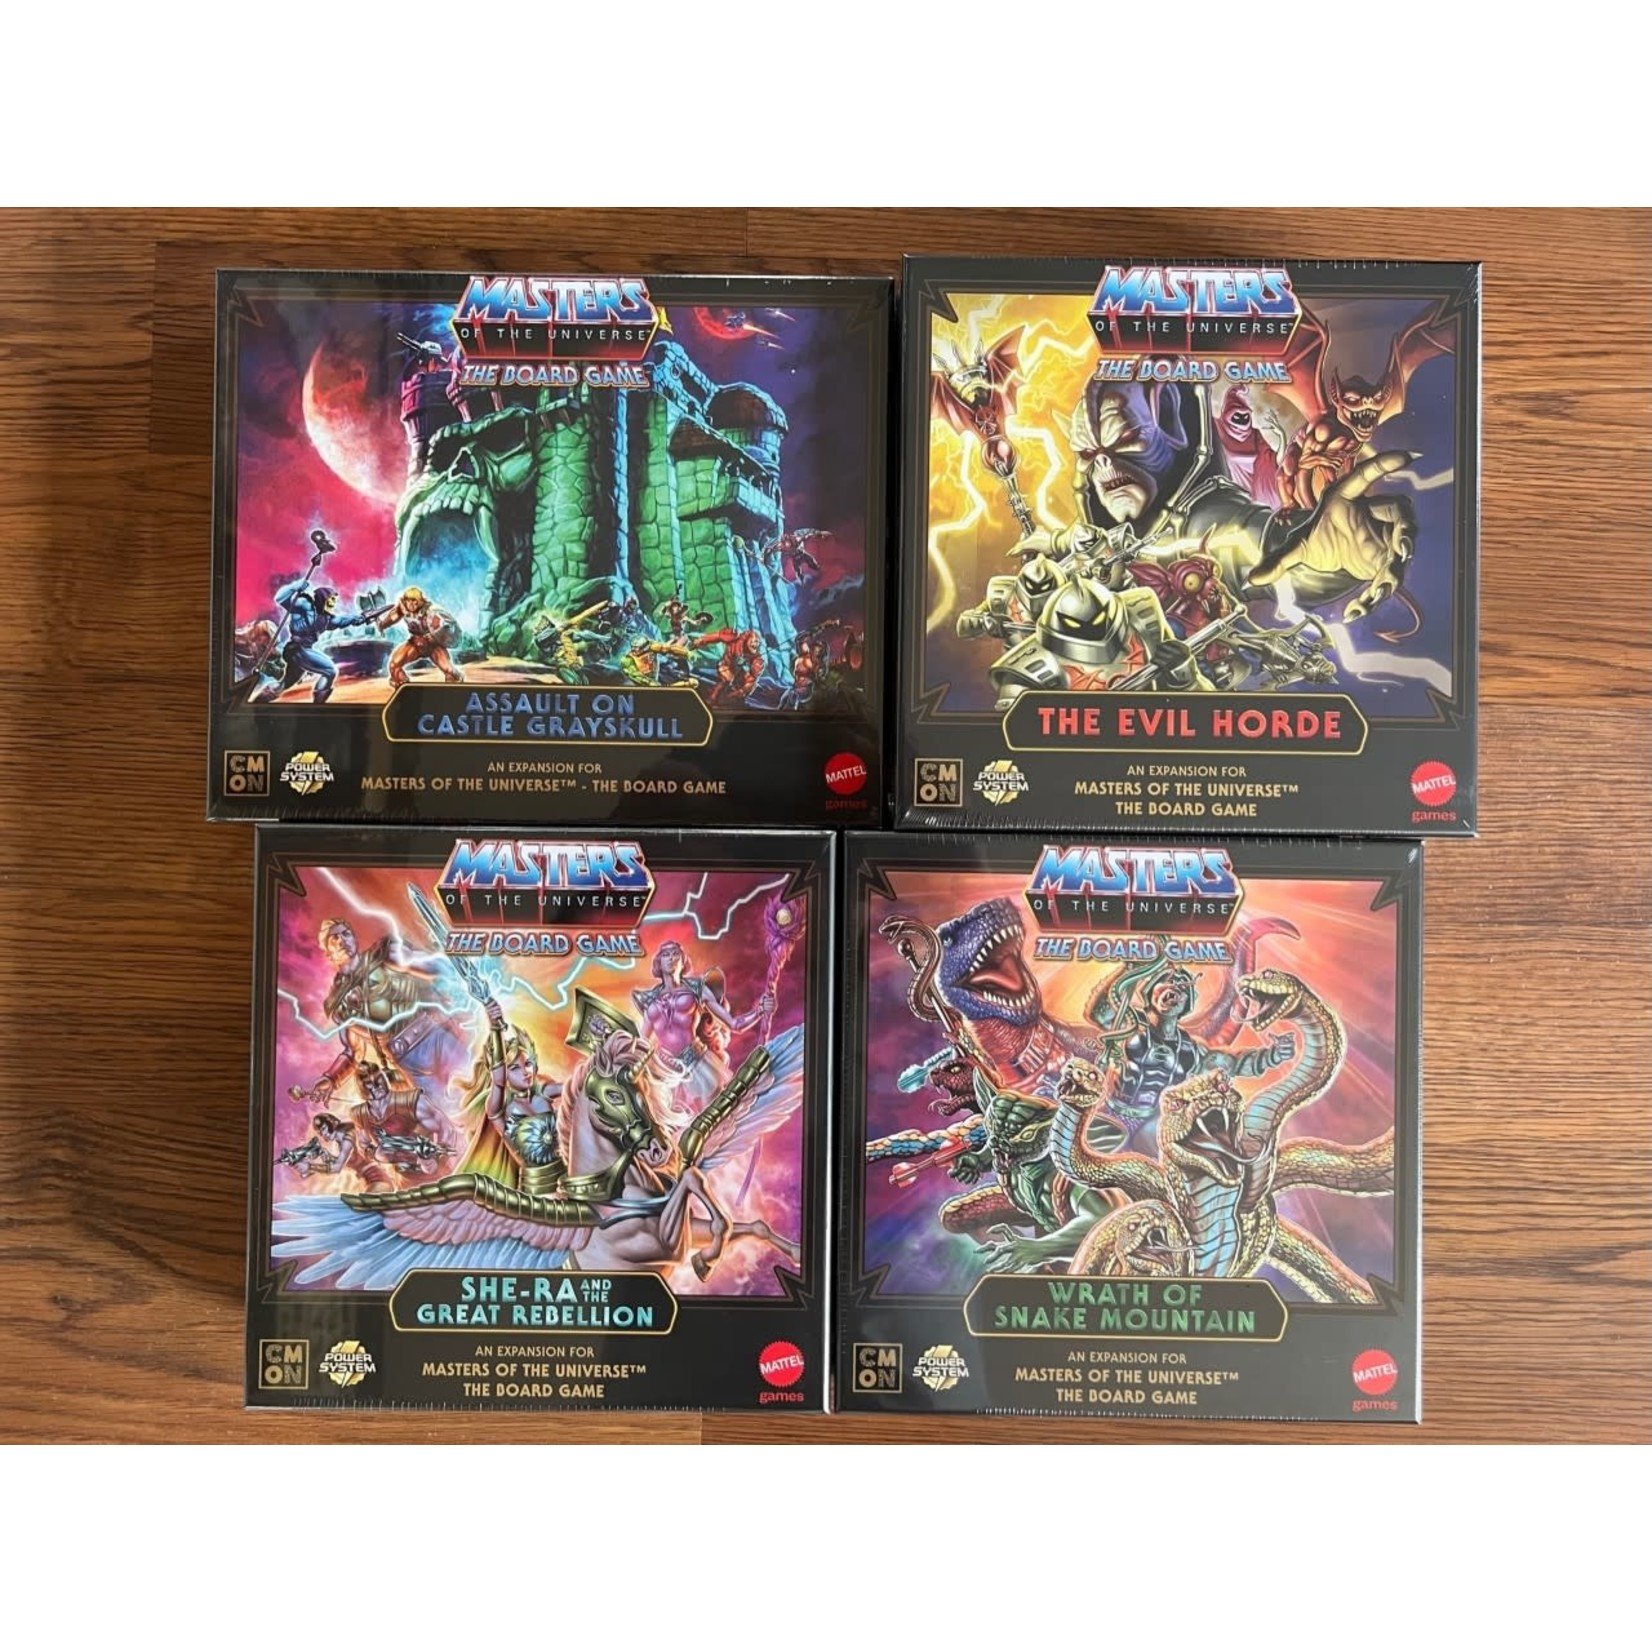 Masters of the Universe: The Board Game – Clash for Eternia LE Bundle